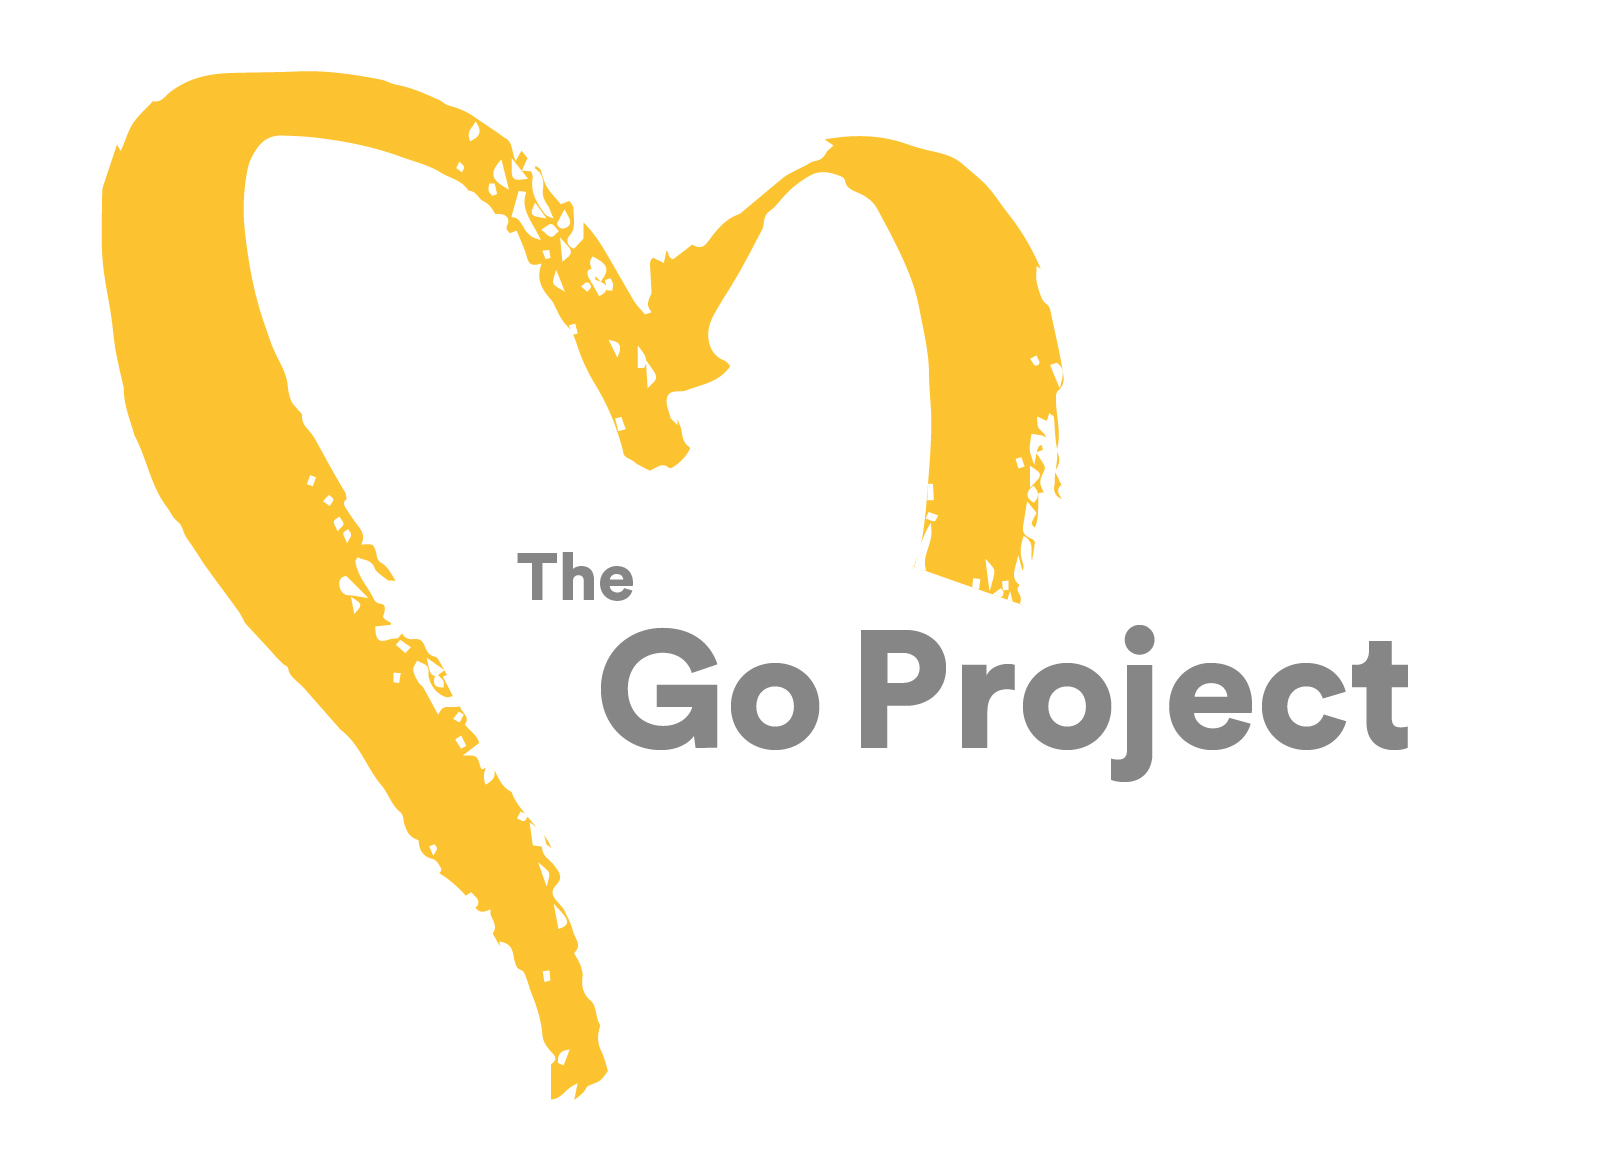 The Go Project Logo